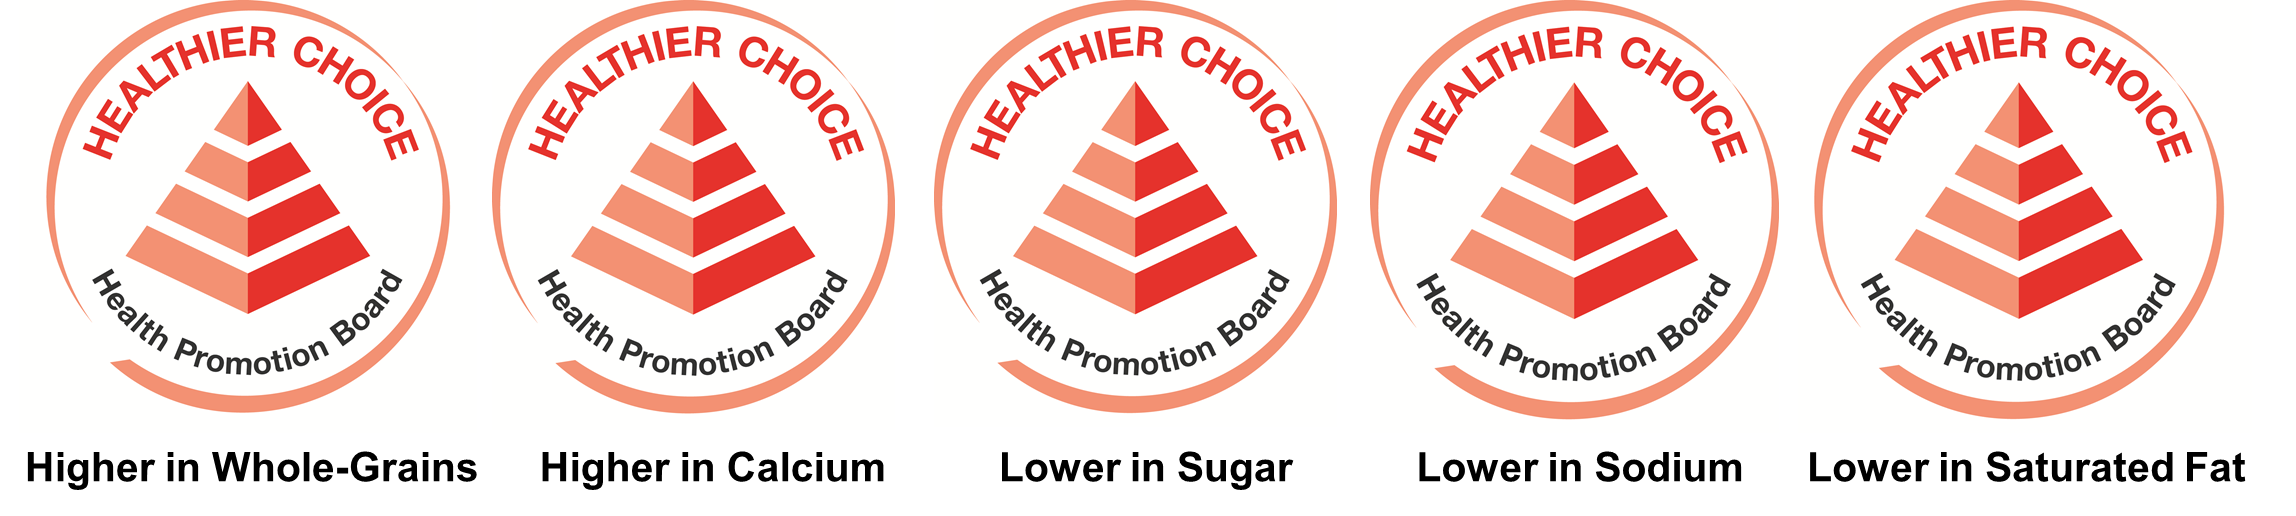 Figure 4 - Examples of Healthier Choice Symbol